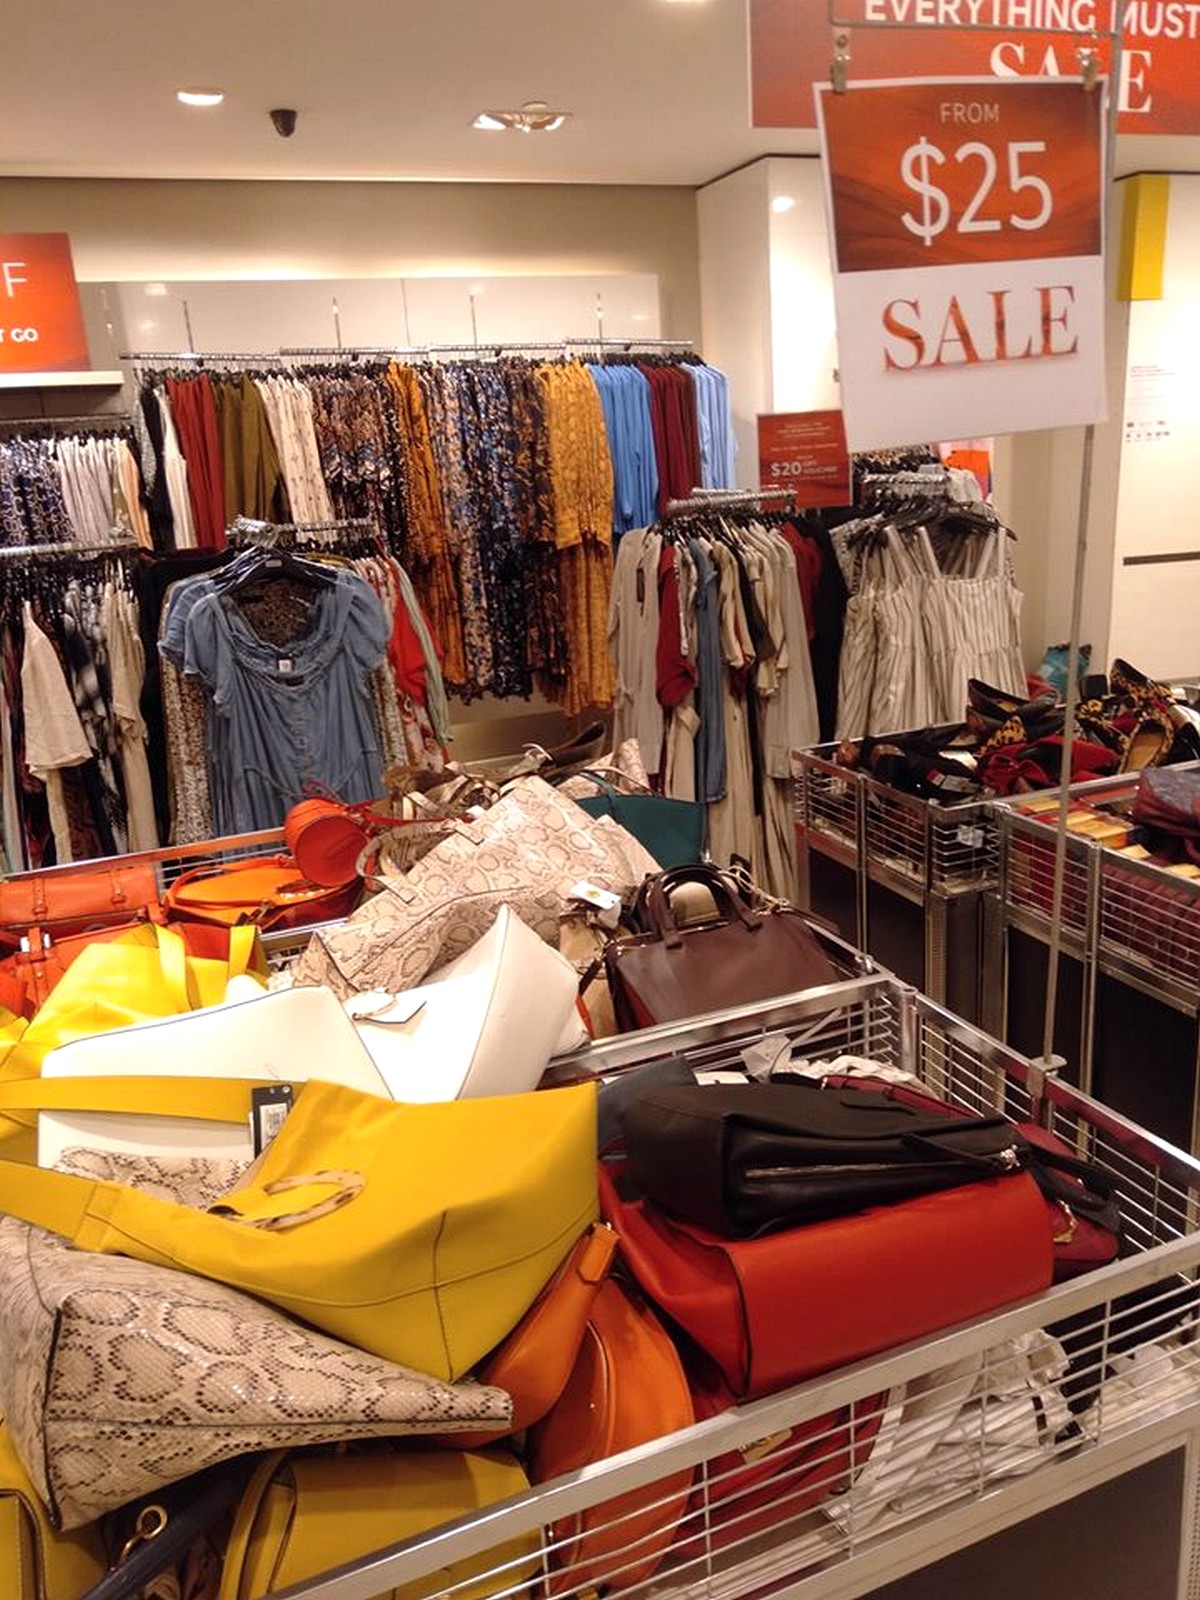 Marks-Spencer-Relocation-Sale-Everything-Must-Go-Clearance-Warehouse-Discounts-2020-Singapore-Plaza-Singapura-2021-011 Today onwards: Marks & Spencer Relocation Sale! Everything Must Go!